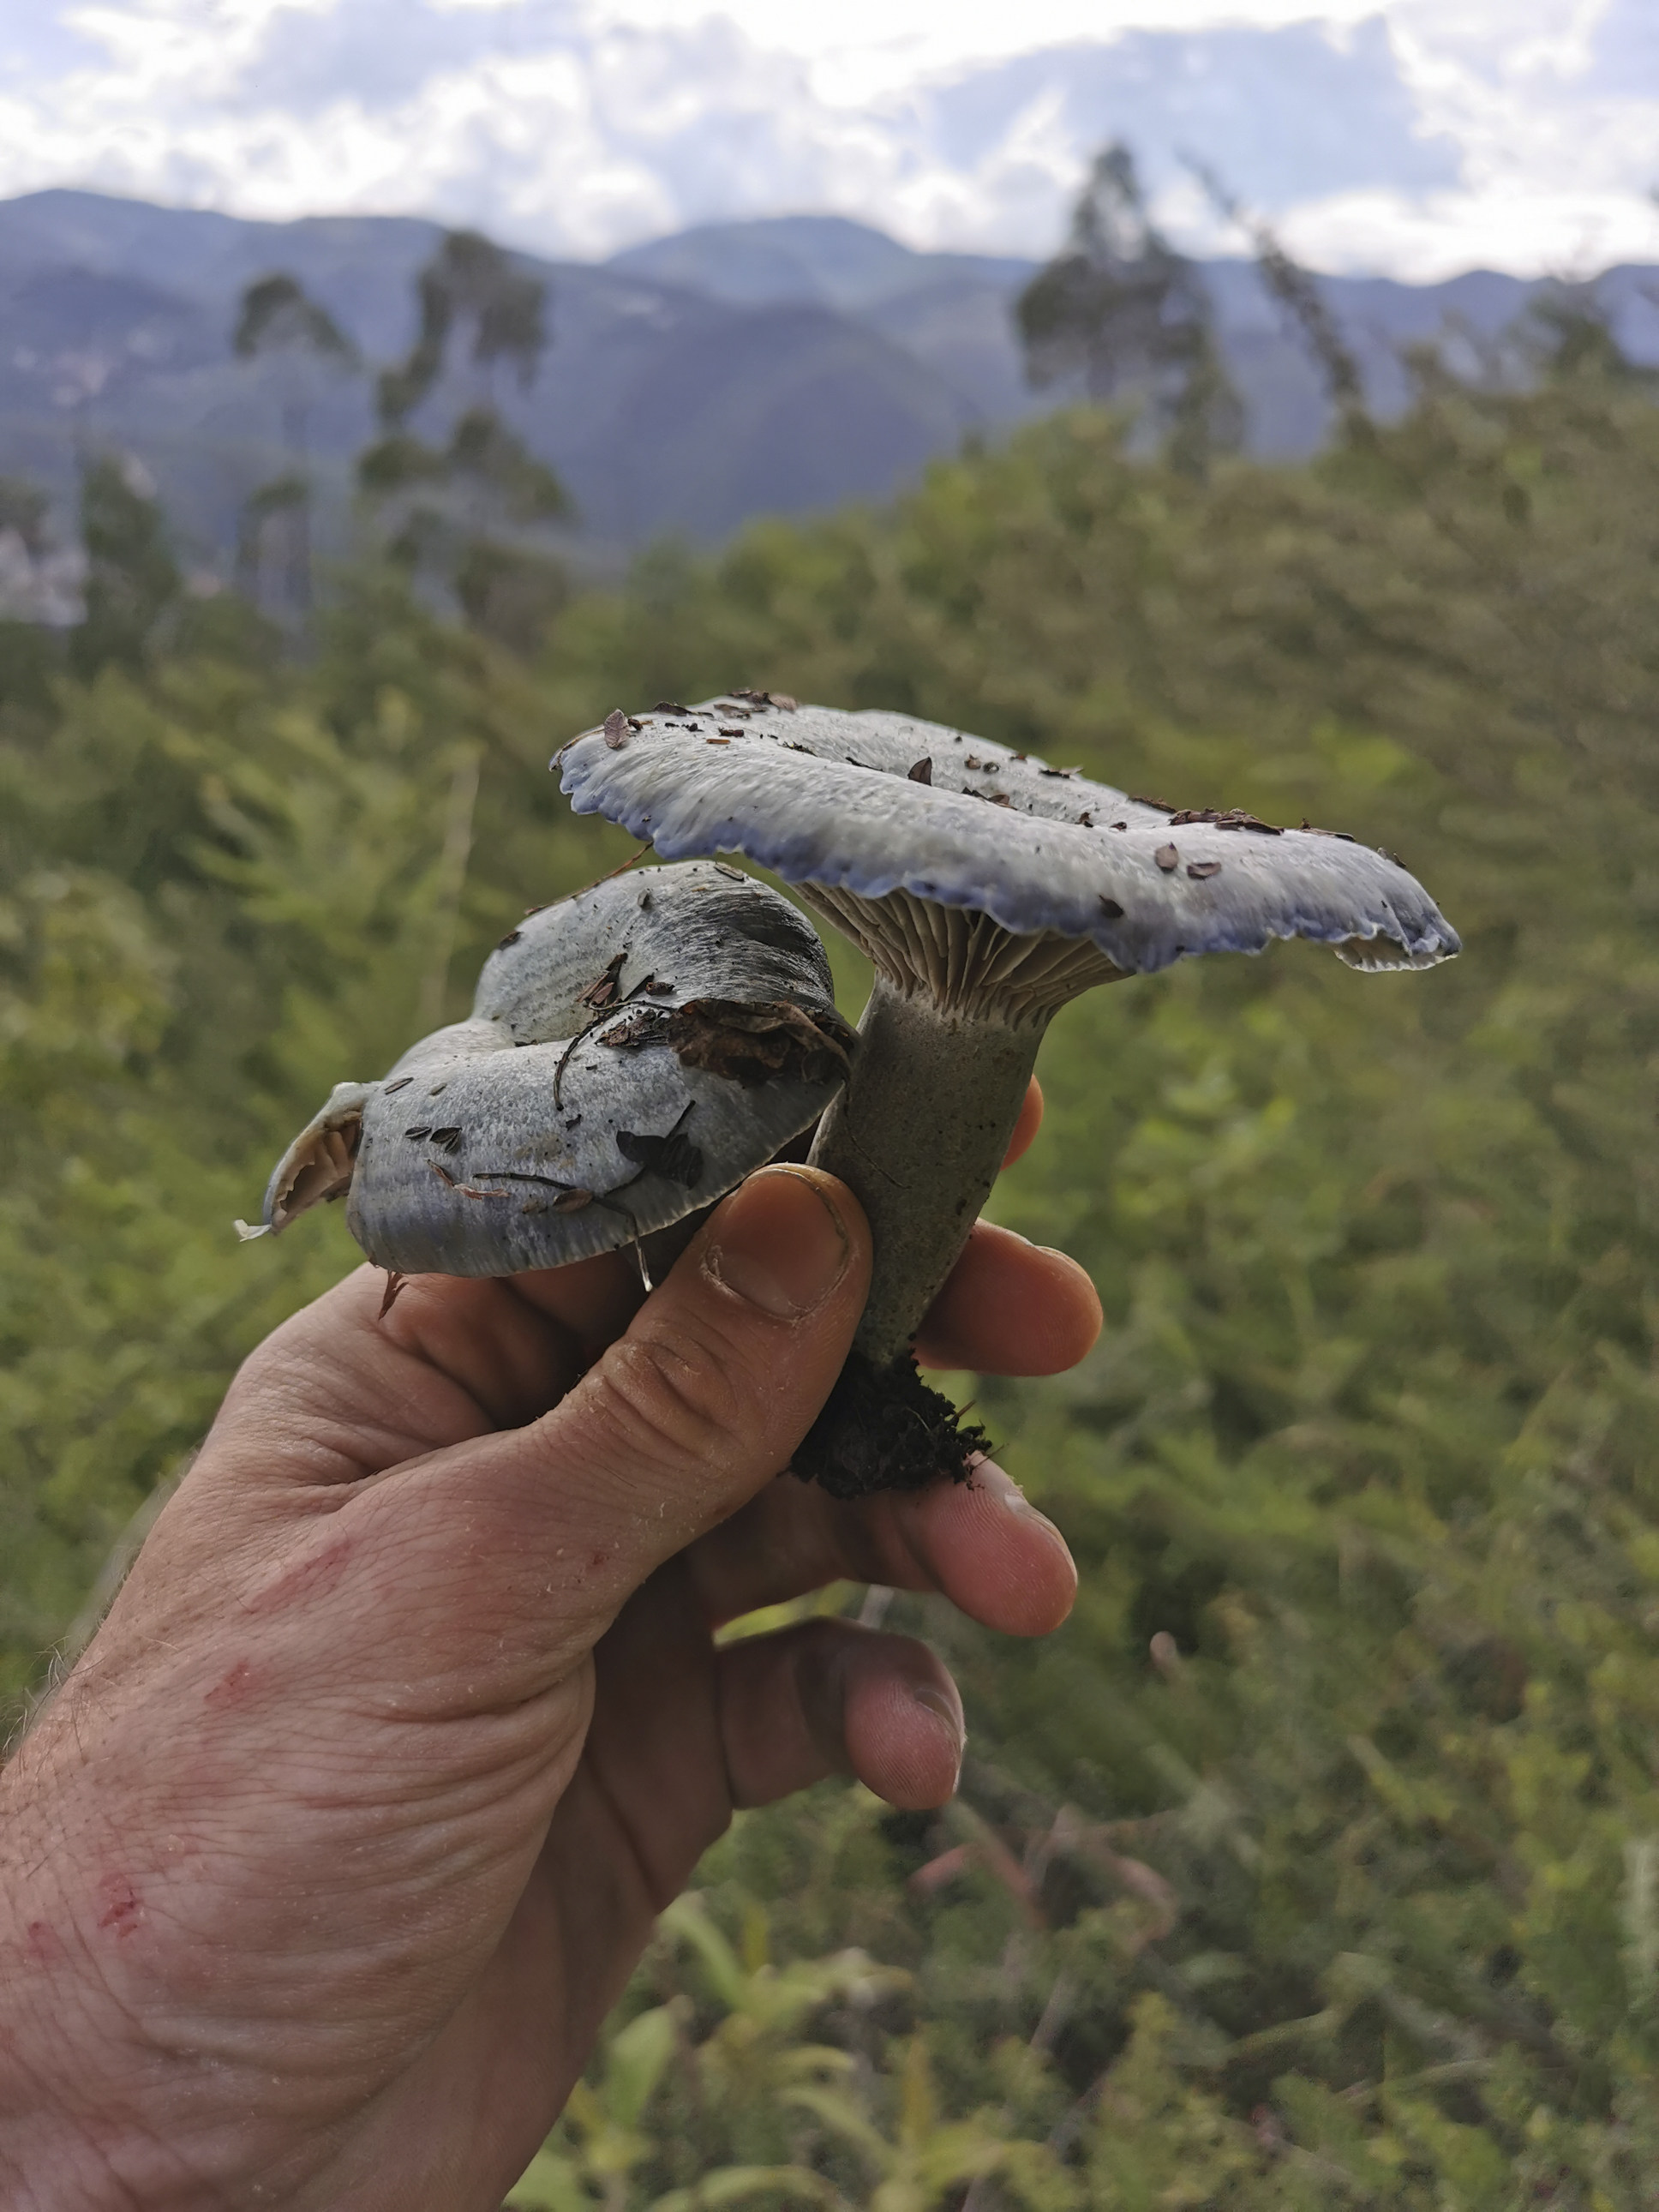 The indigo milk cap mushroom is unusually rich in dietary fibre, though little research has been done on its wider health and nutritional benefits. Photo: Pavel Toropov